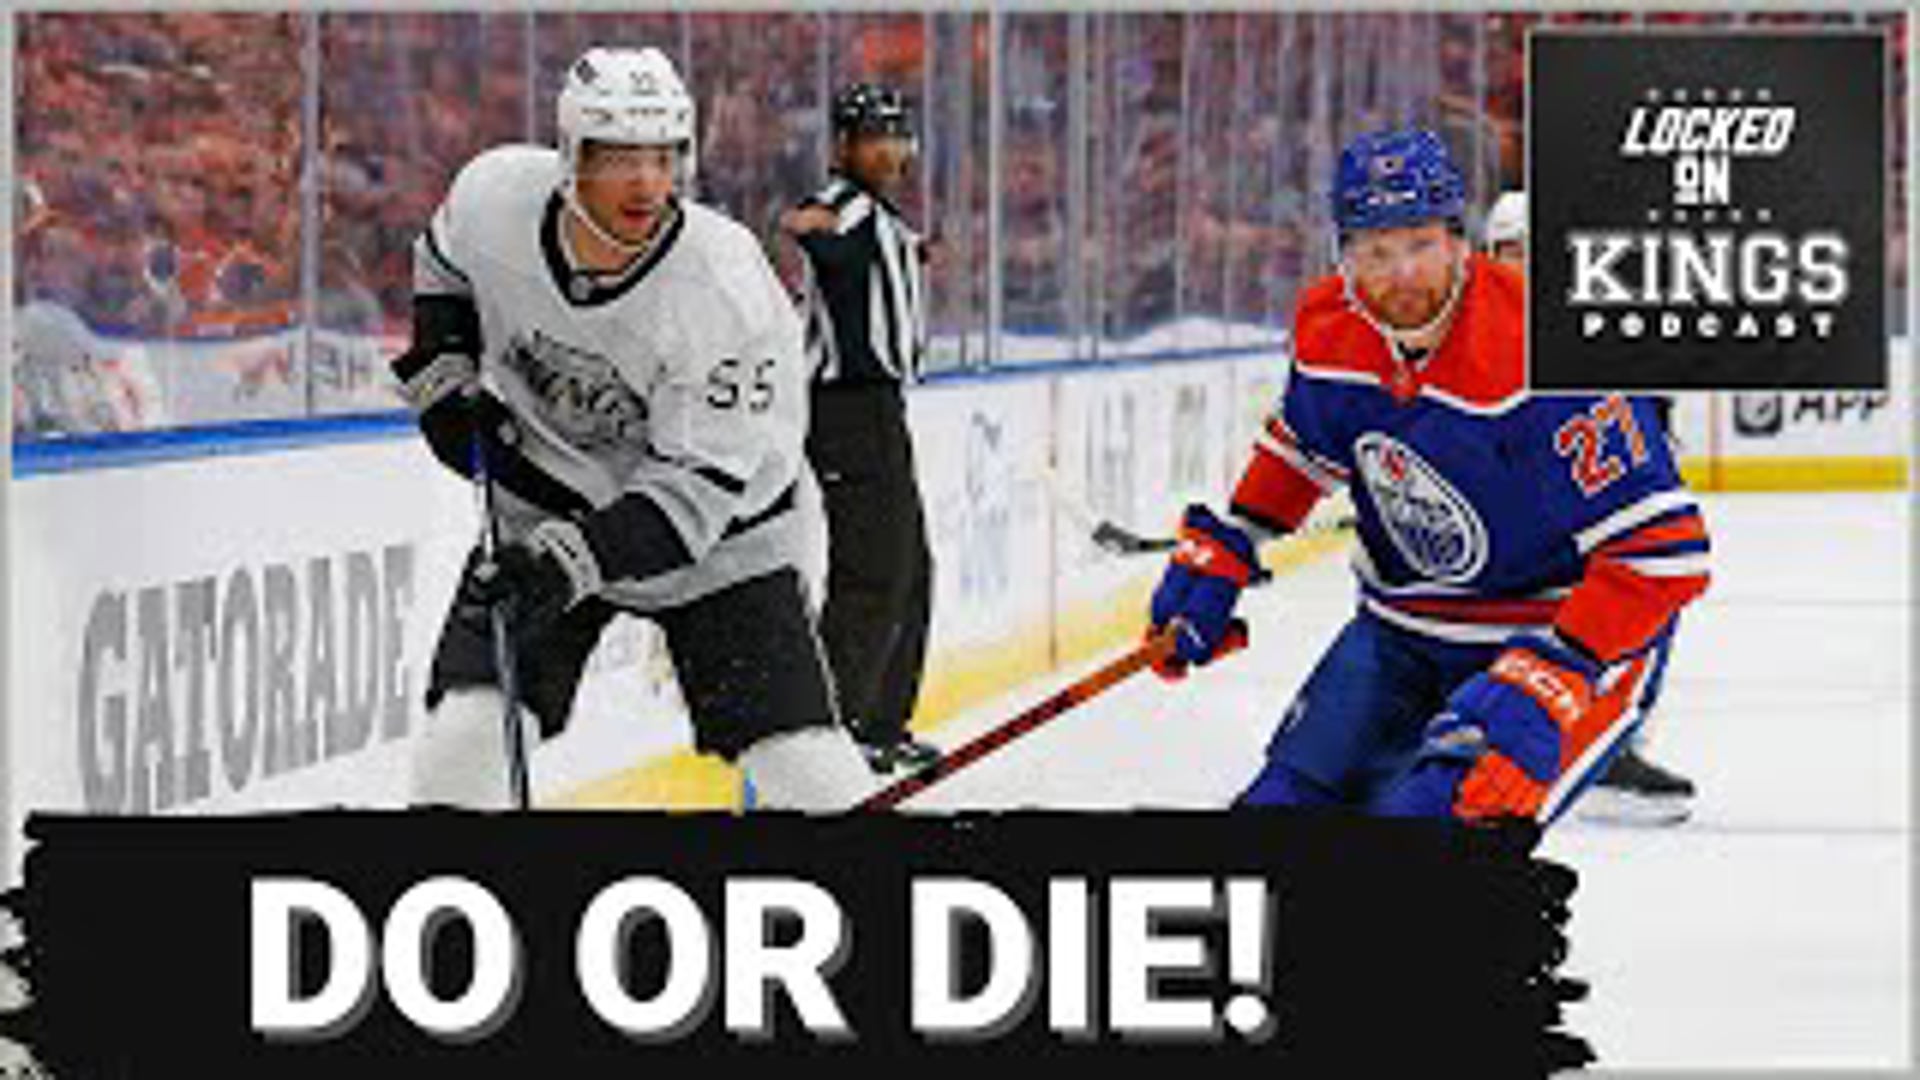 It is do or die for the LA Kings in Edmonton tonight. It's a must win Game 5. What needs to happen and who needs to step up? We break it down on this episode of LOK!